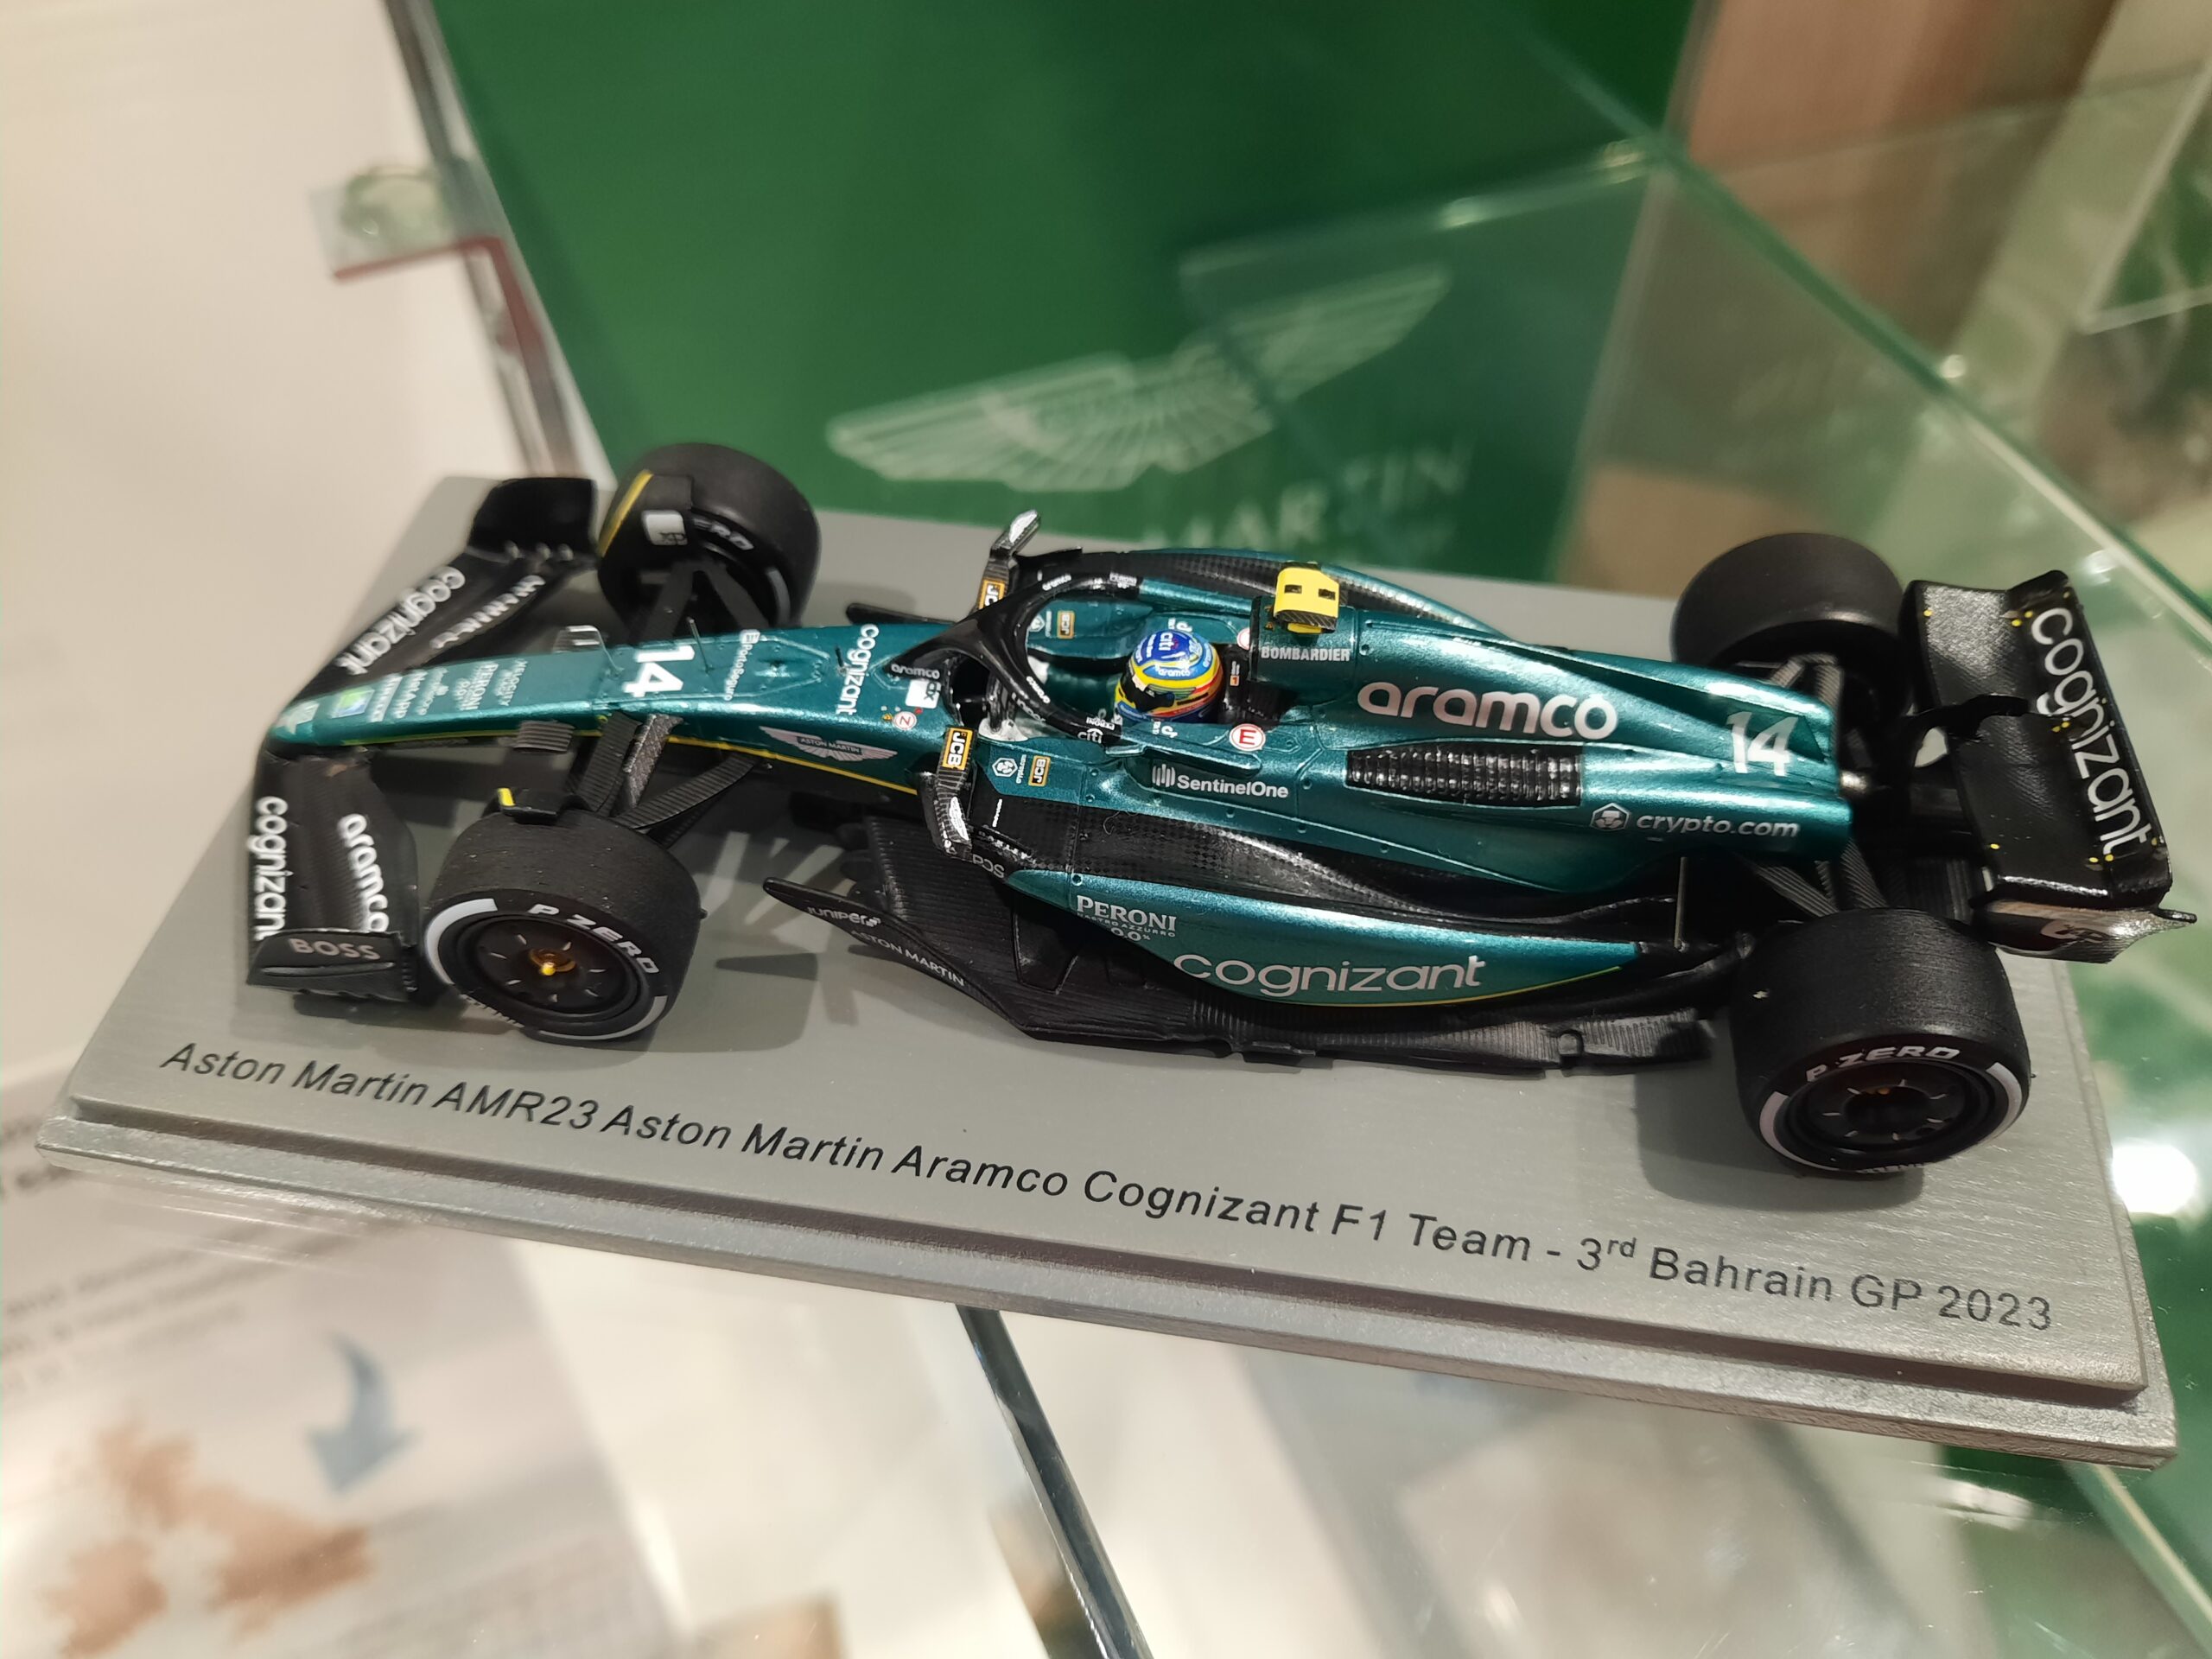 Image of a scale model of AMR23, the Aston Martin Aramco Cognizant F1 Team car, in metallic green livery. On the mount for the model is the inscription 'Aston Martin AMR23 Aston Martin Aramco Cognizant F1 Team - 3rd Bahrain GP 2023'